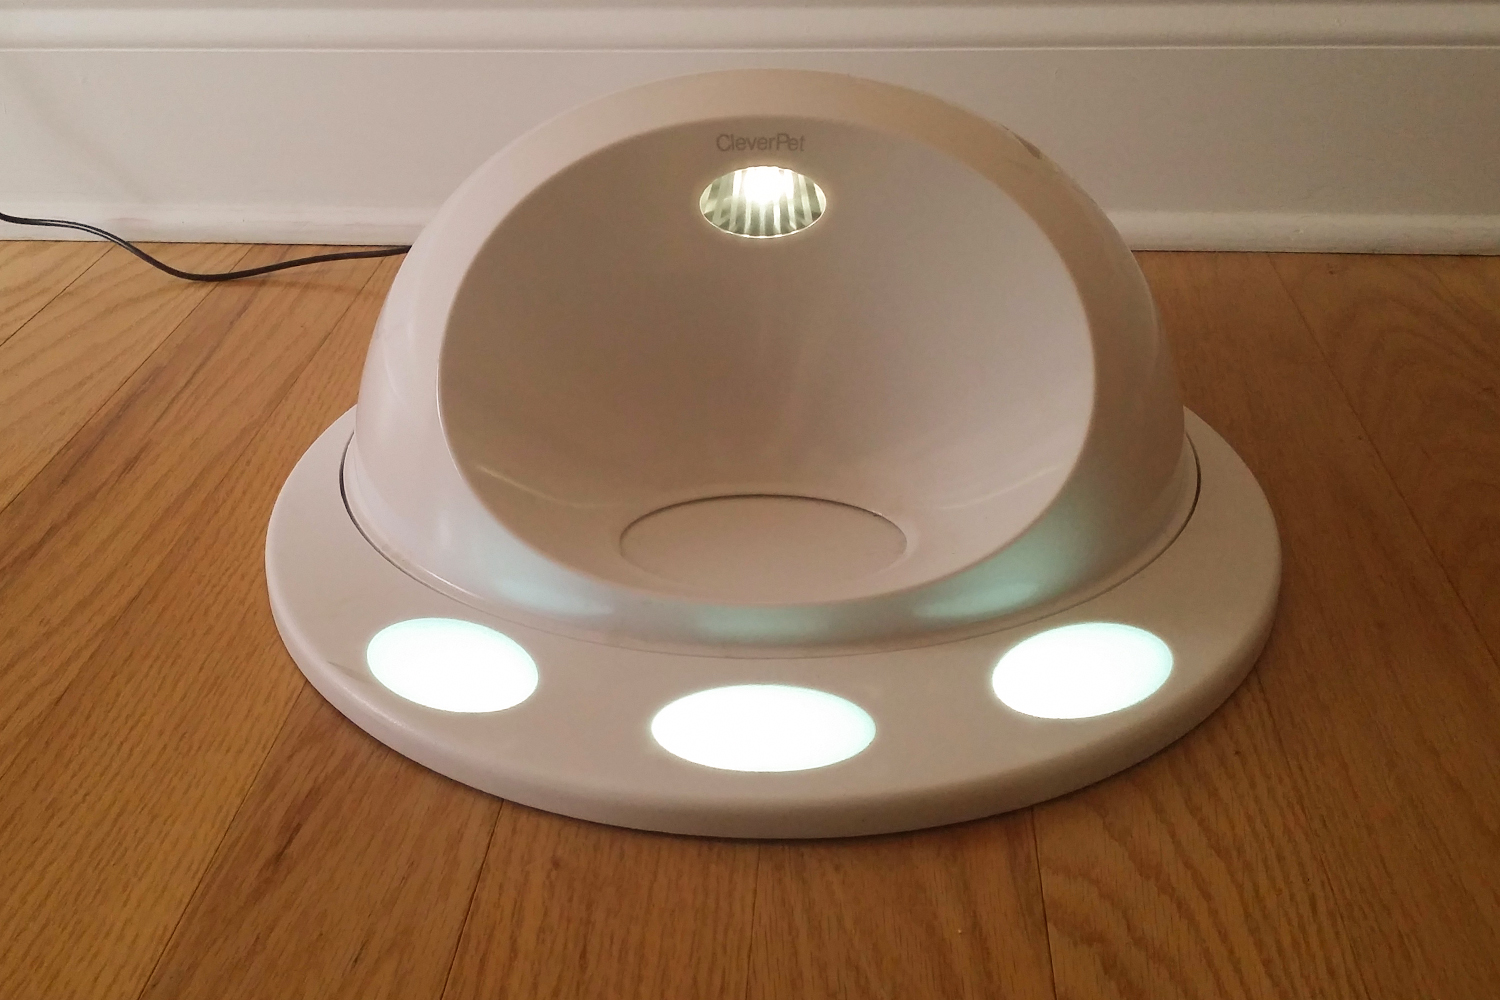 cleverpet hub first impressions review feeder 1